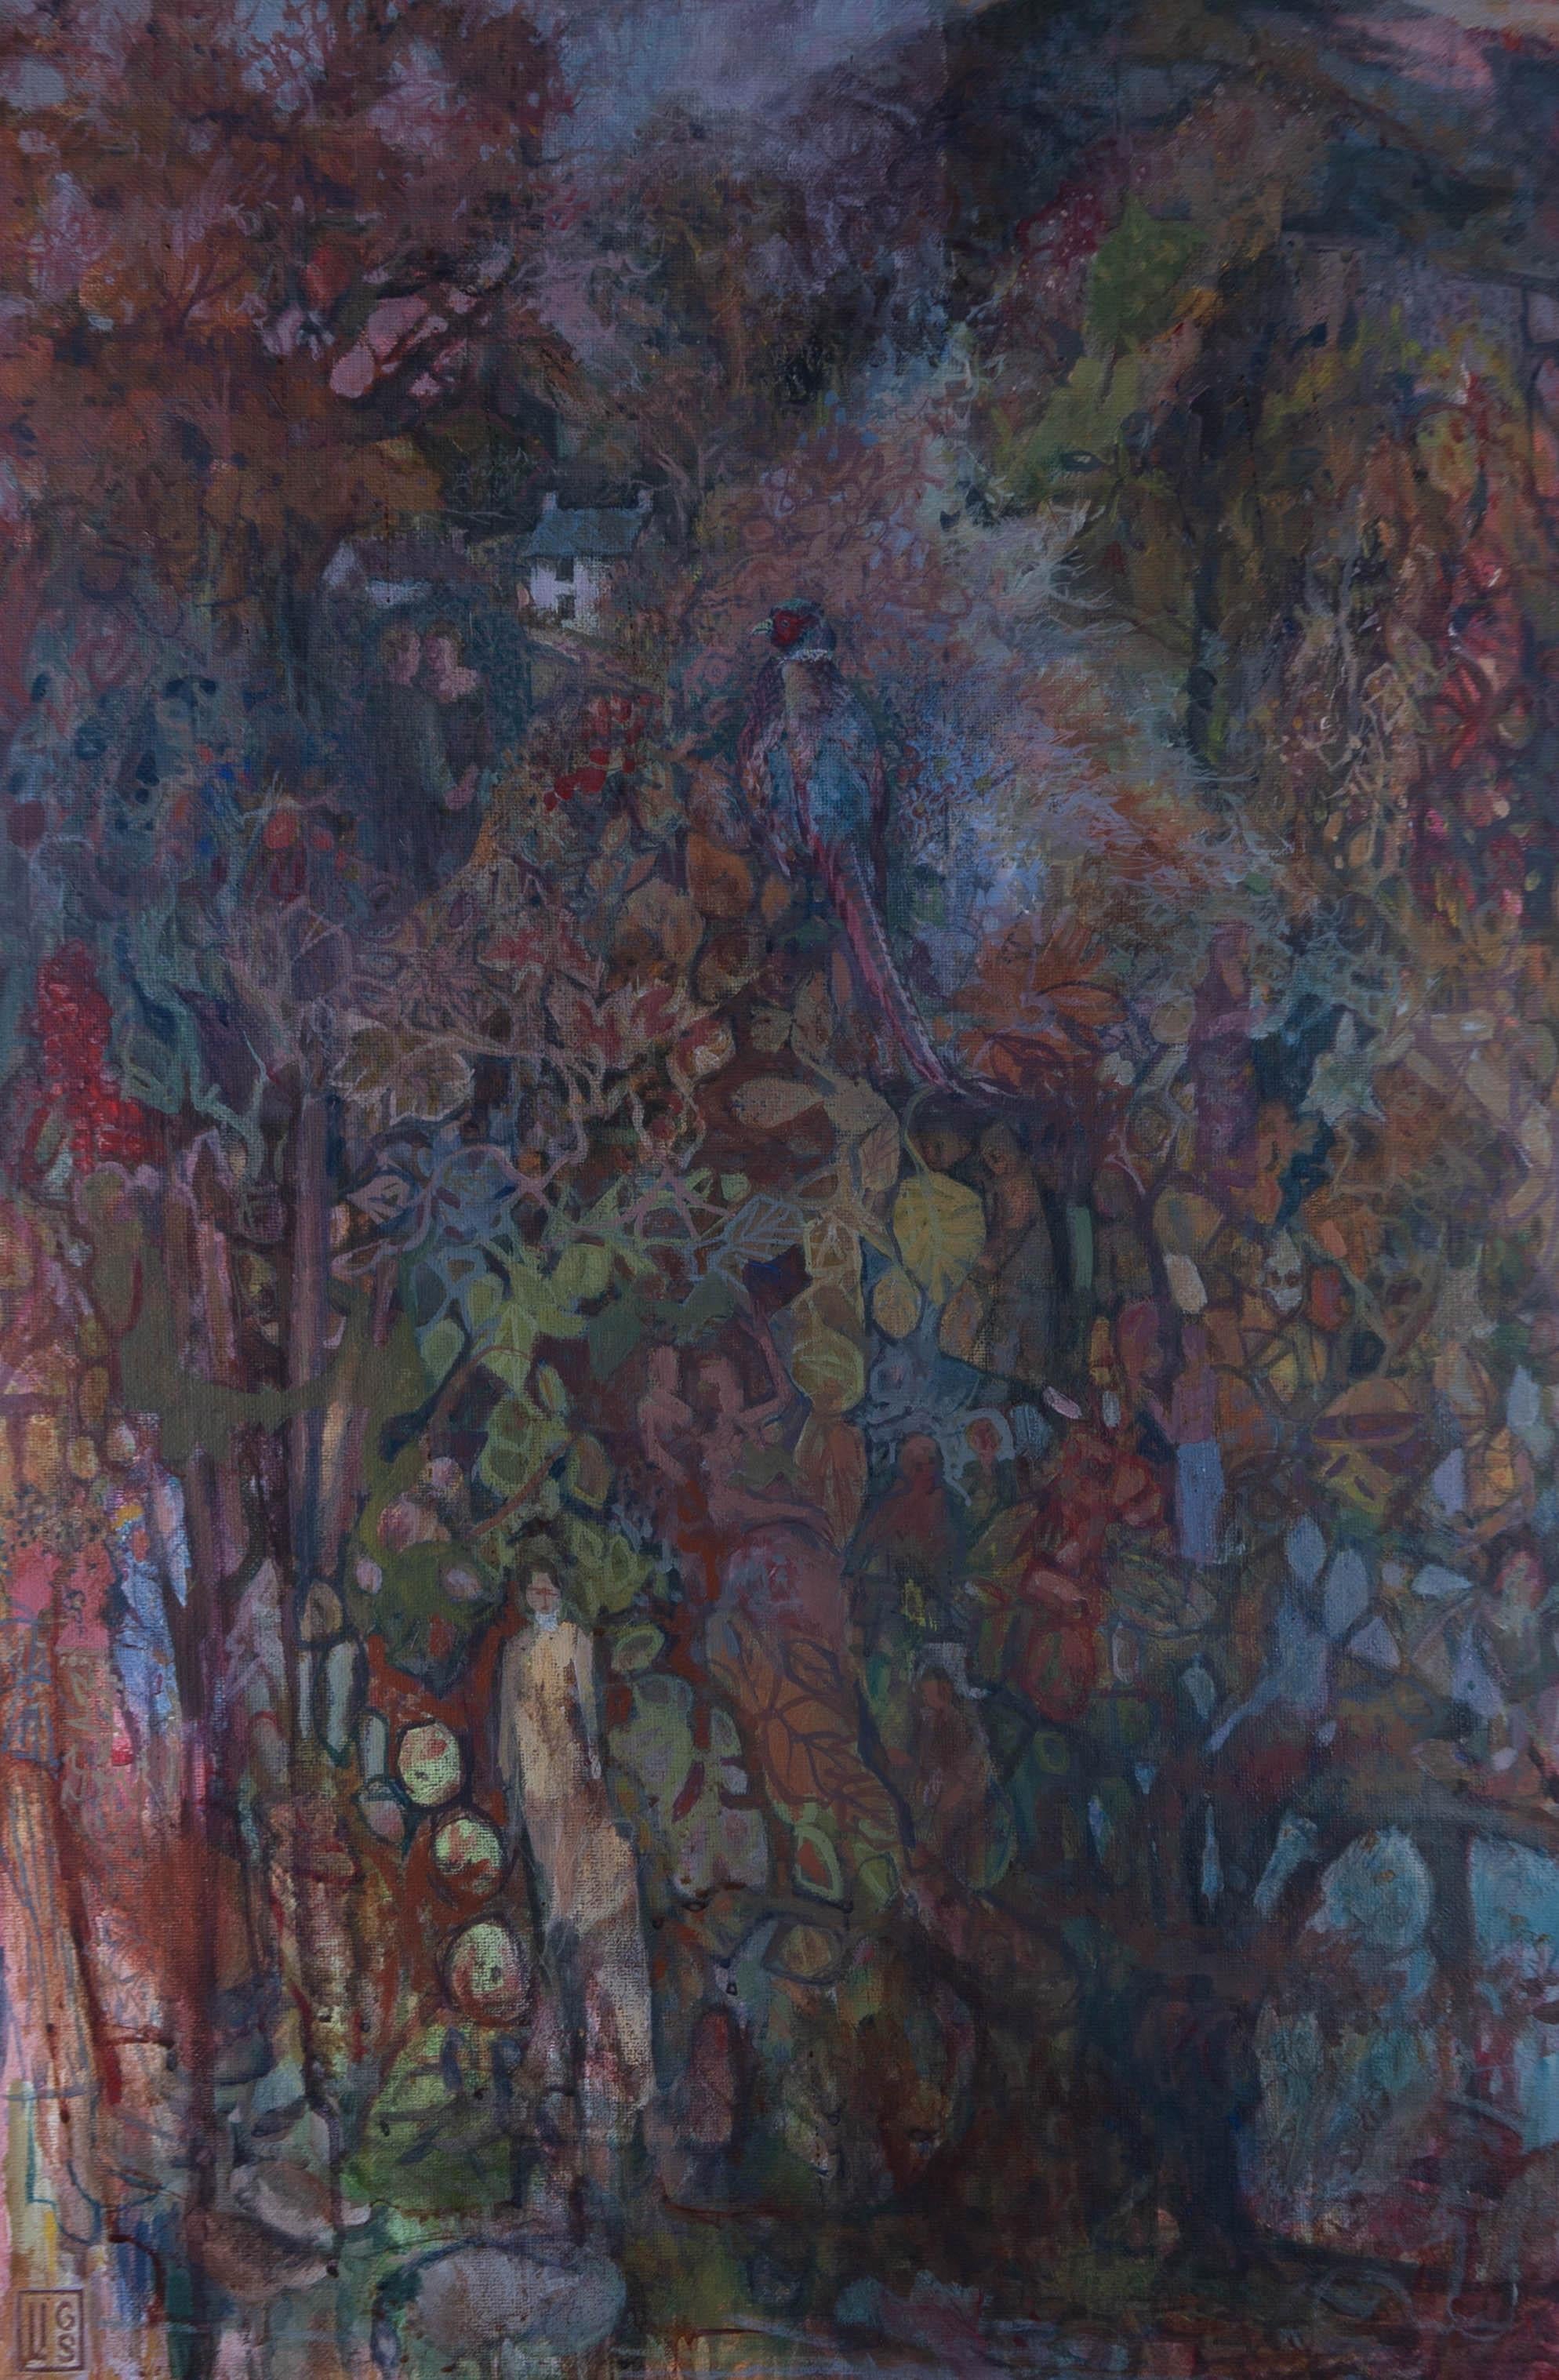 An eclectic and dynamic modernist depiction of Autumn in oil. The artist has created a wonderfully rich scene with of figures intertwined with trees, leaves and other Autumnal motifs such as a pheasant, apples and brown leaves. A cottage can be seen